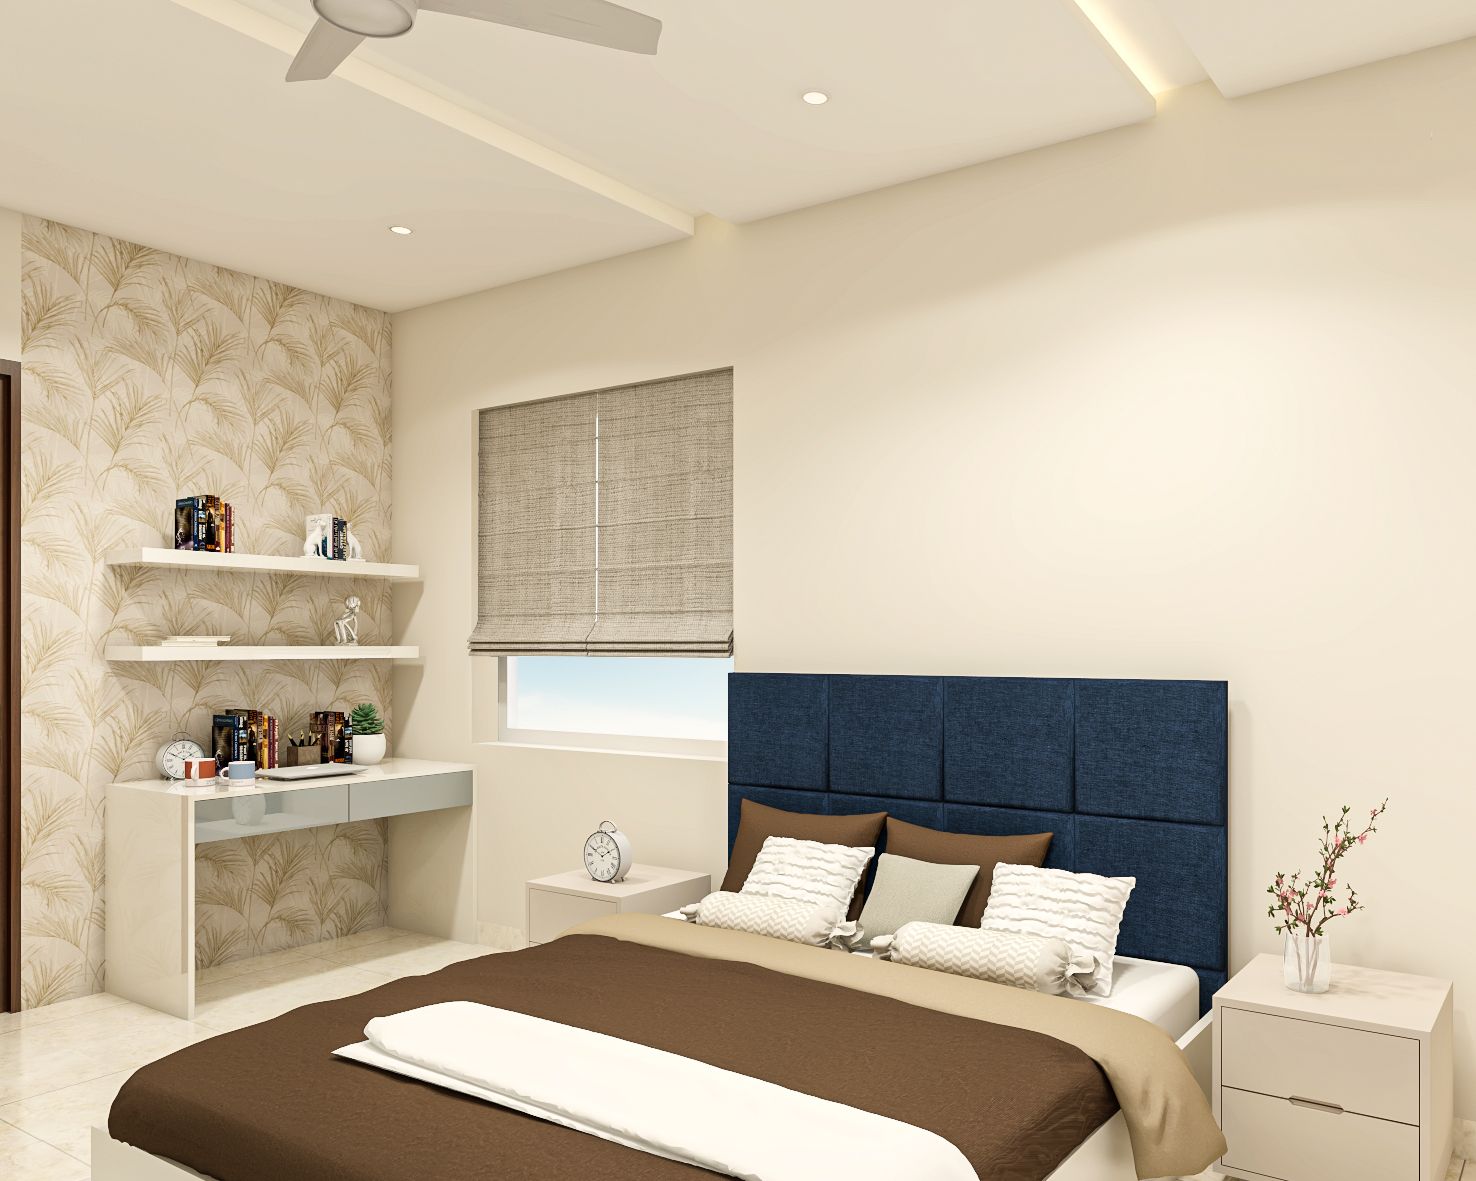 Contemporary Guest Bedroom Design With A White Bed And A Dark Blue Tufted Headboard